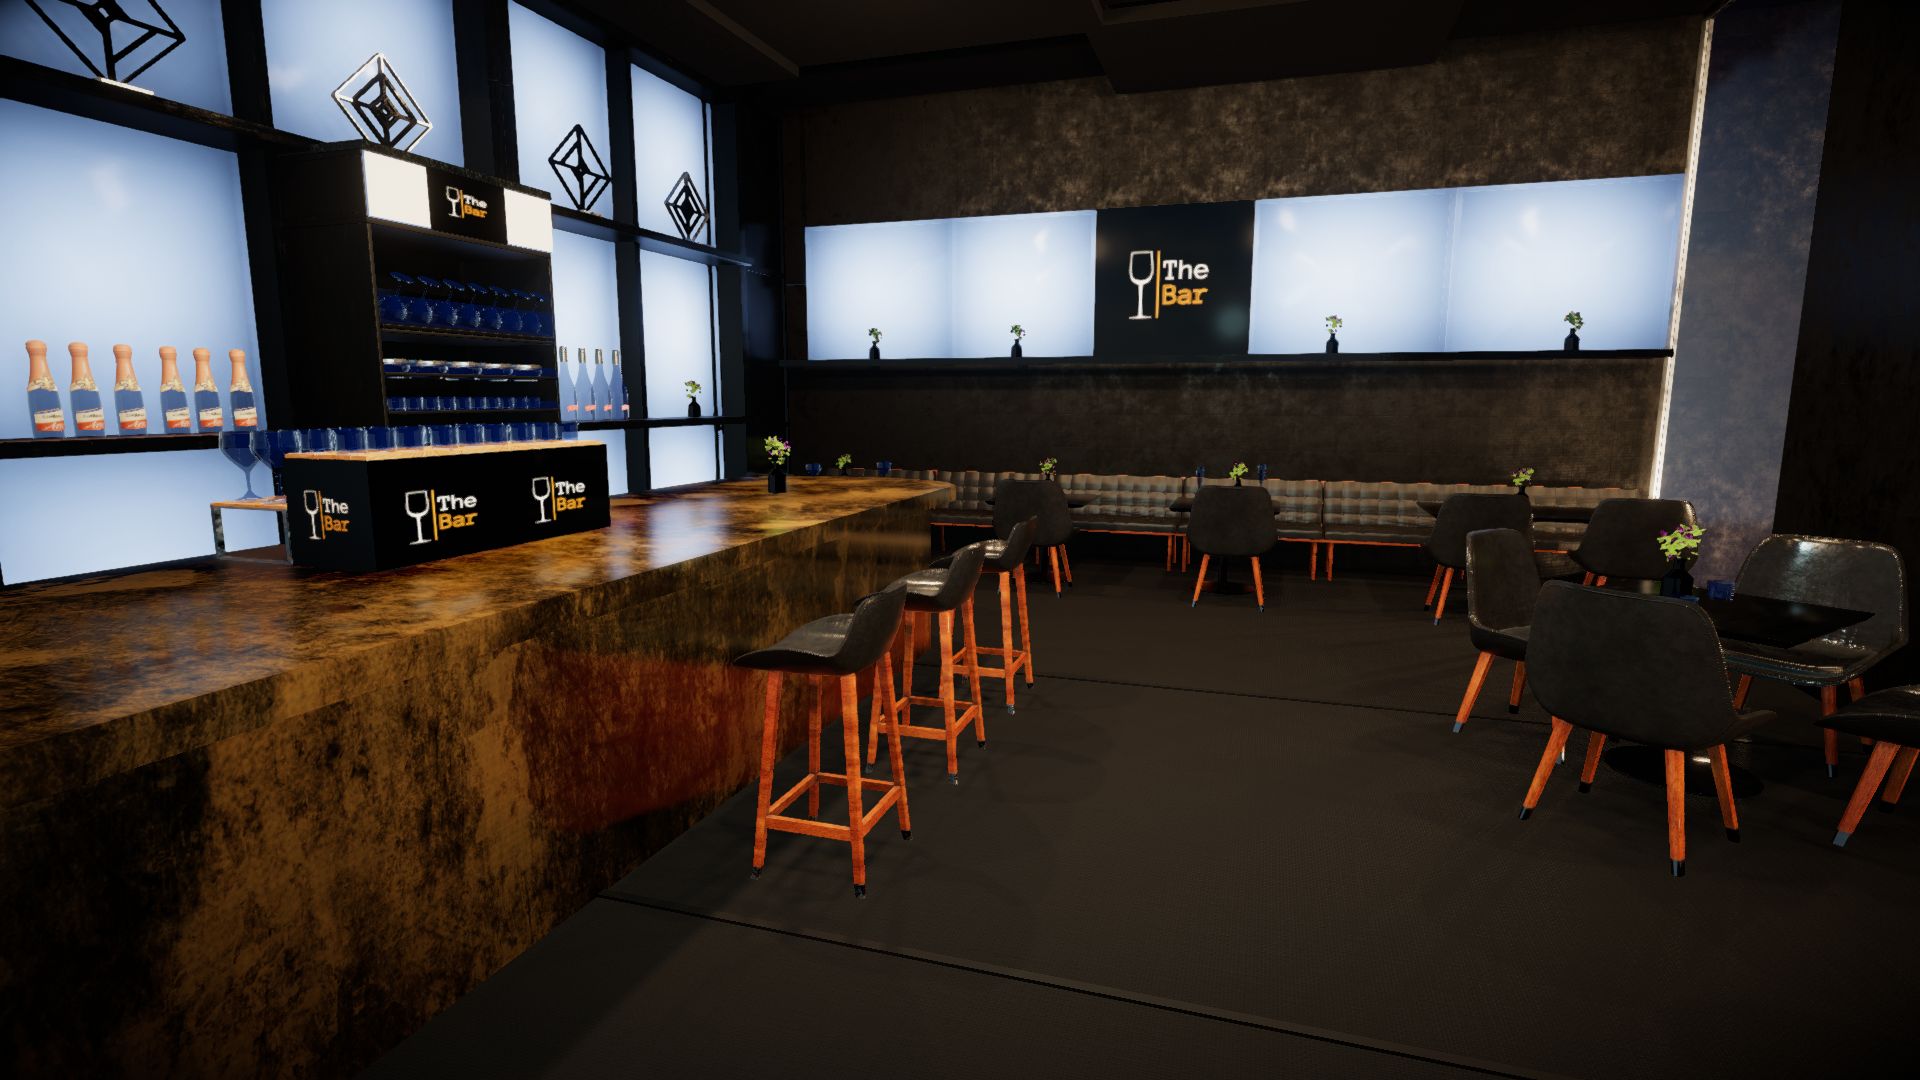 An image showing The Bar asset pack, created with Unity Engine